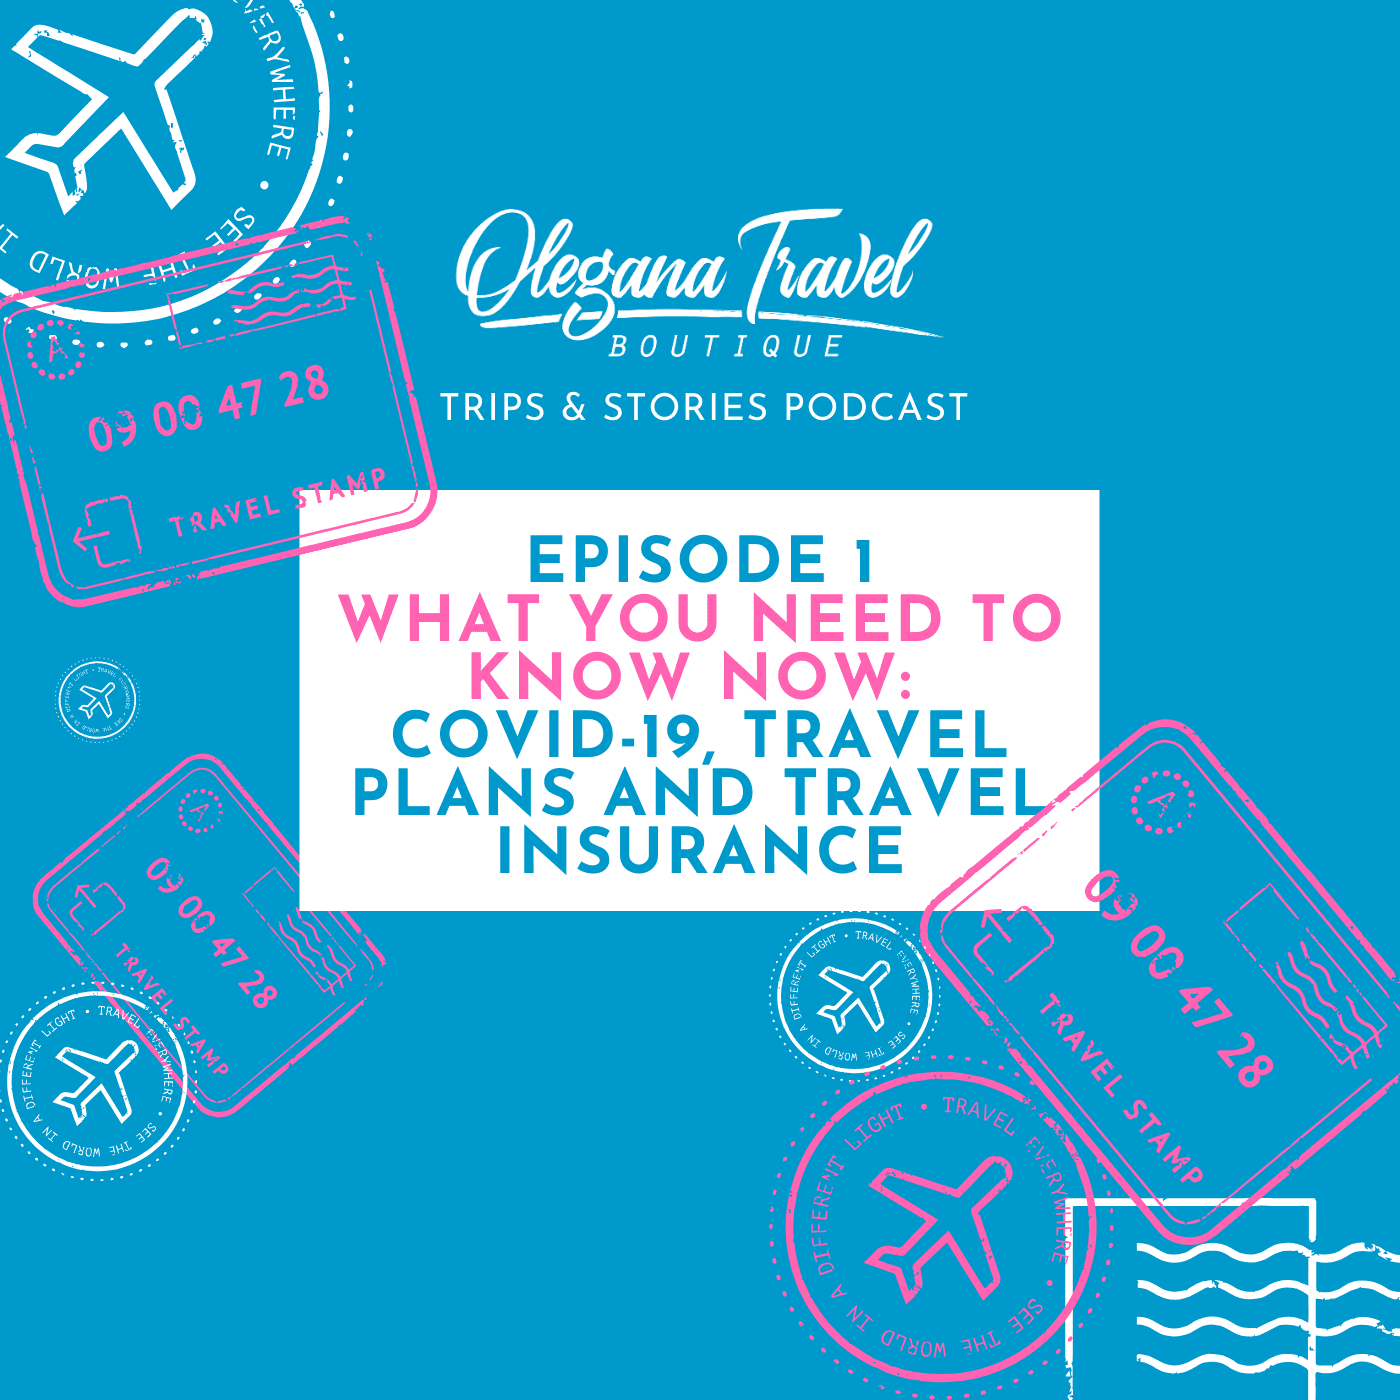 Olegana Travel Boutique Podcast Cover Art - Episode:001 What You Need To Know Now: Coronavirus (COVID19), Travel Plans & Travel Insurance